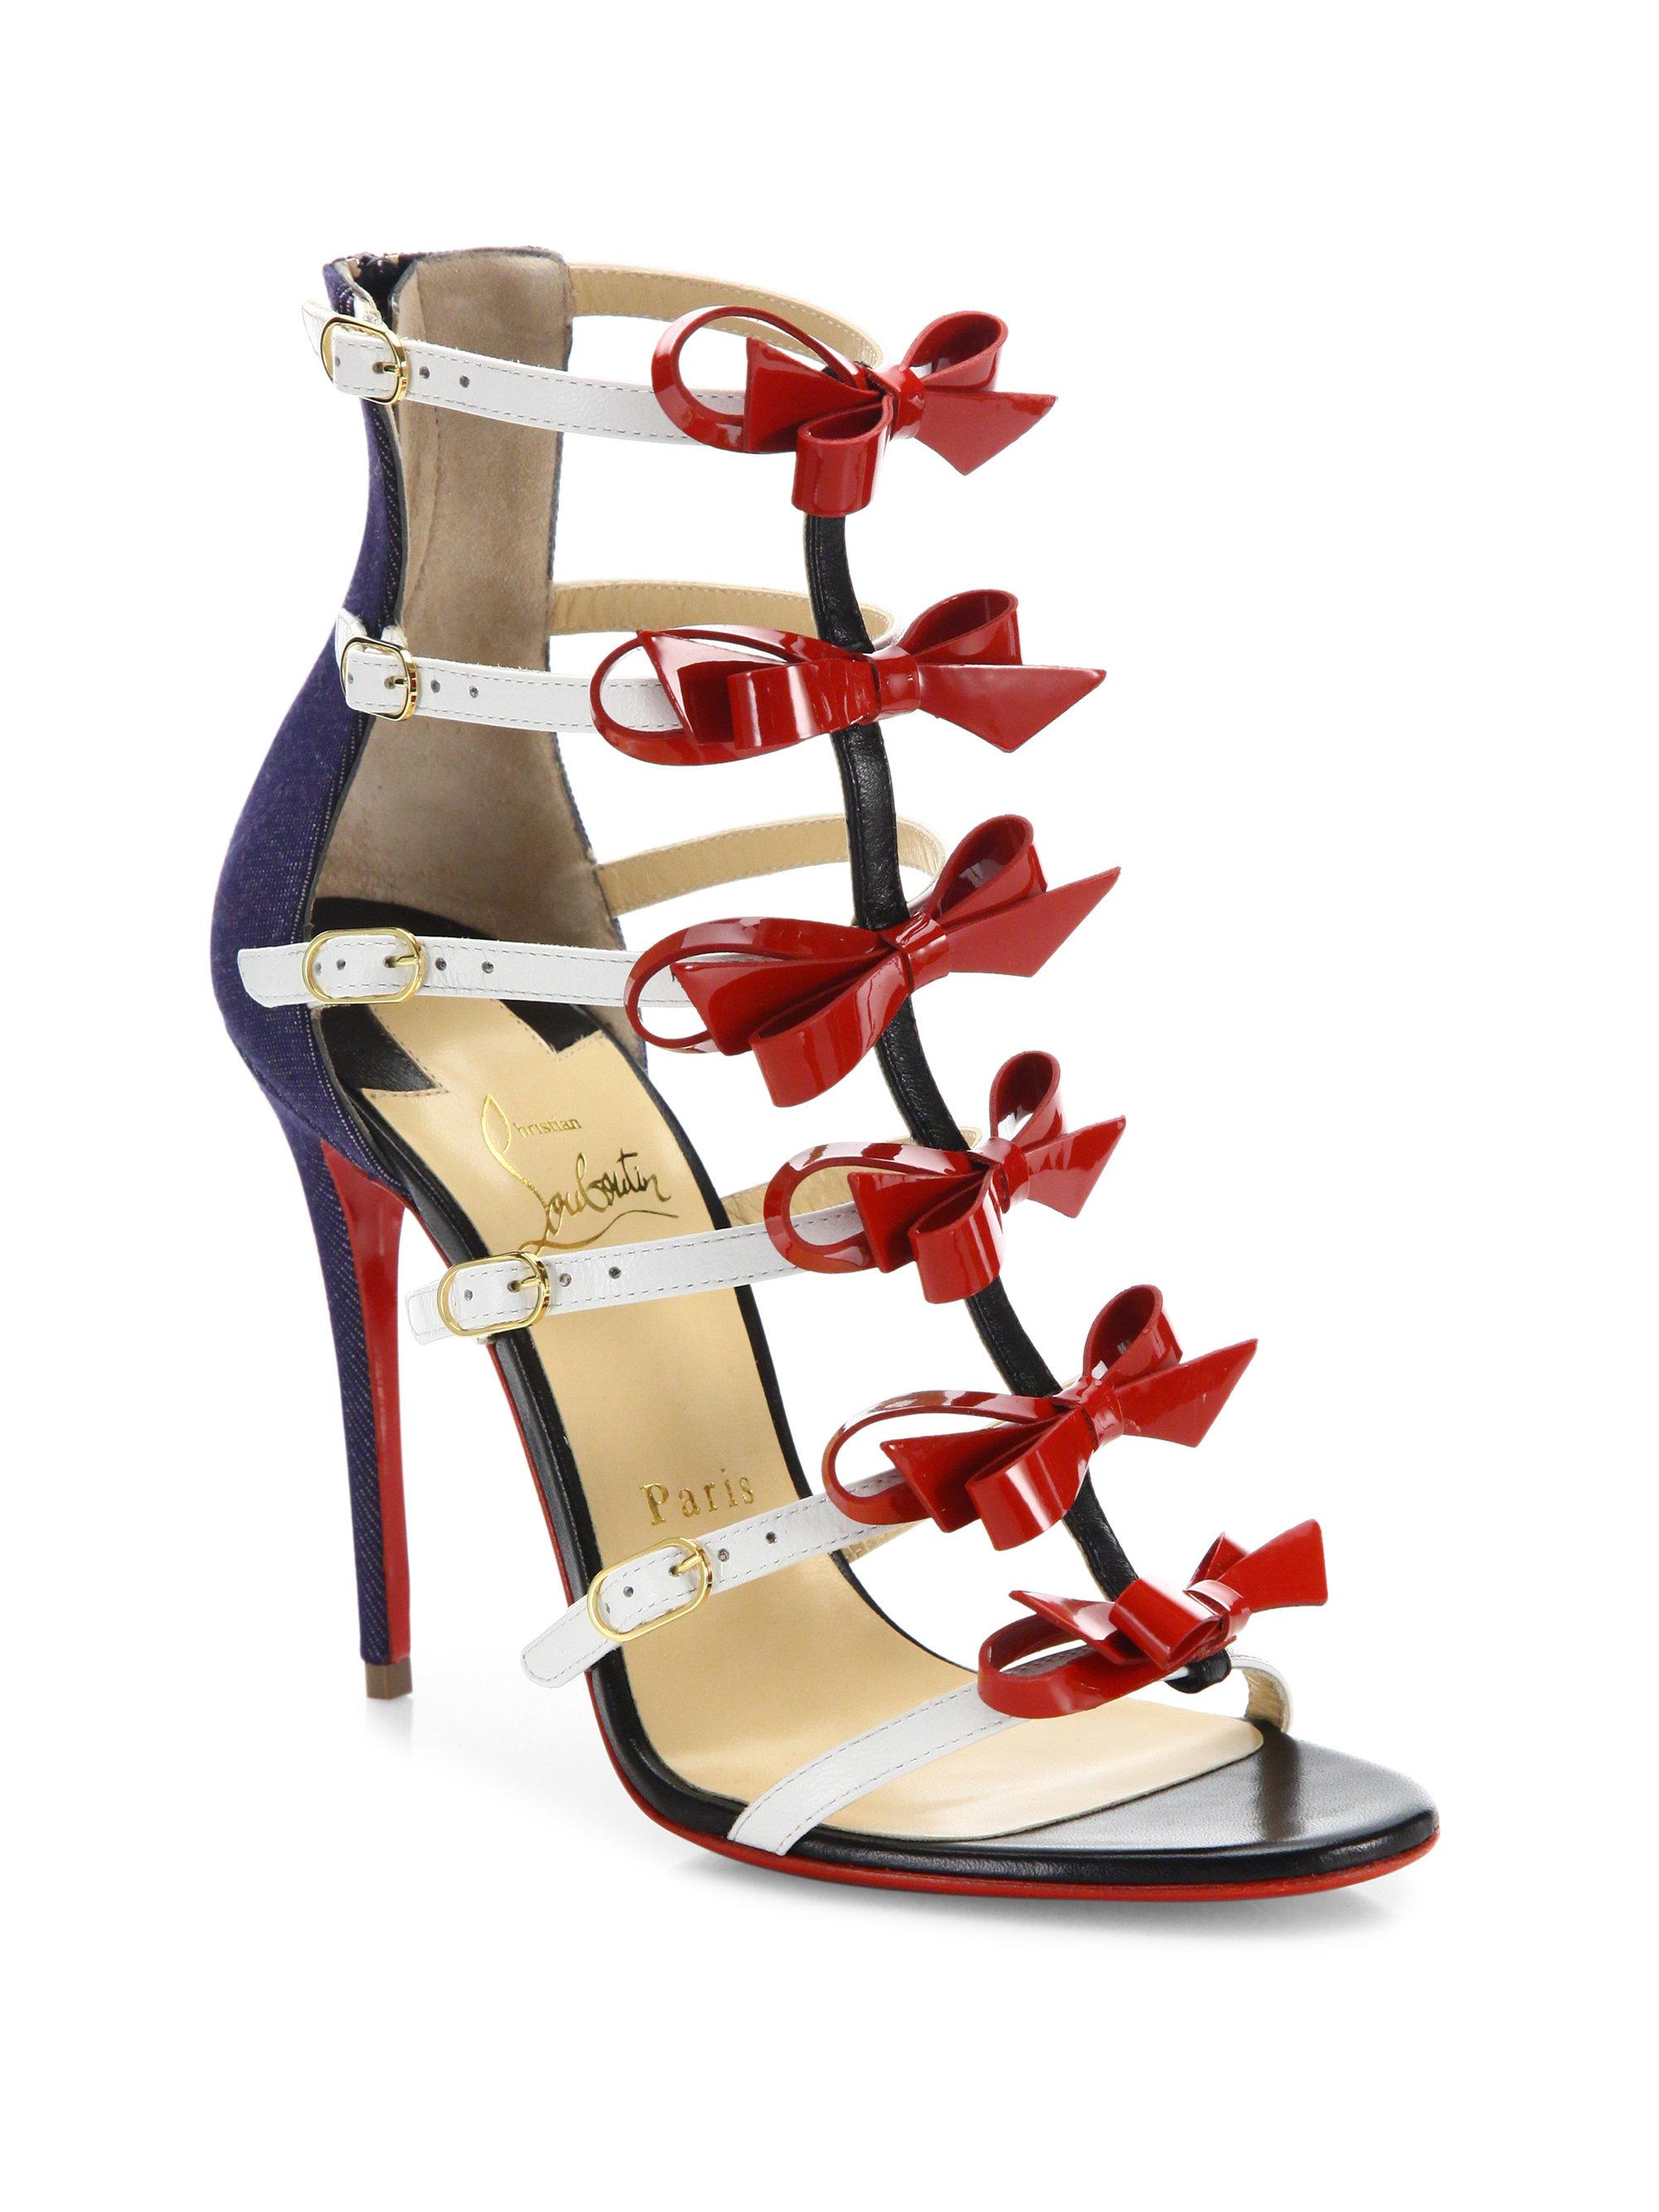 Christian Louboutin Girlistrappi Denim & Leather Bow Sandals in Red - Lyst